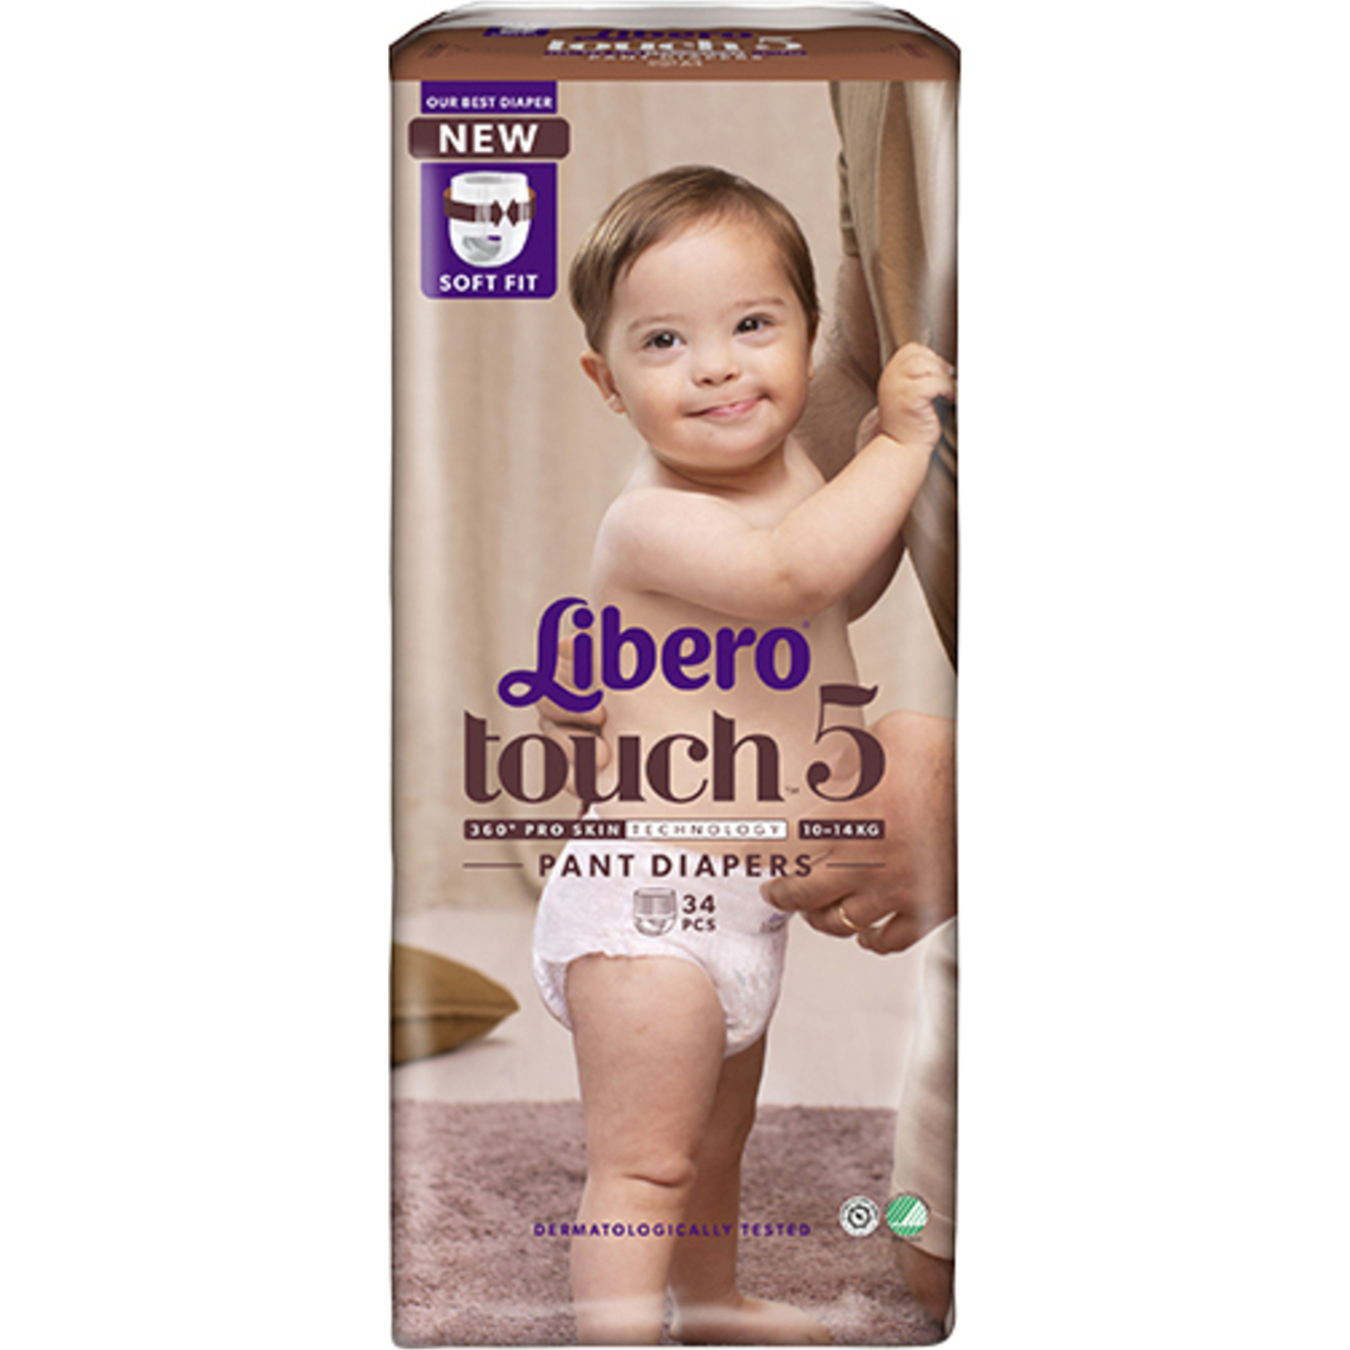 Libero Touch 5 diapers for children 10-14kg 34 pieces